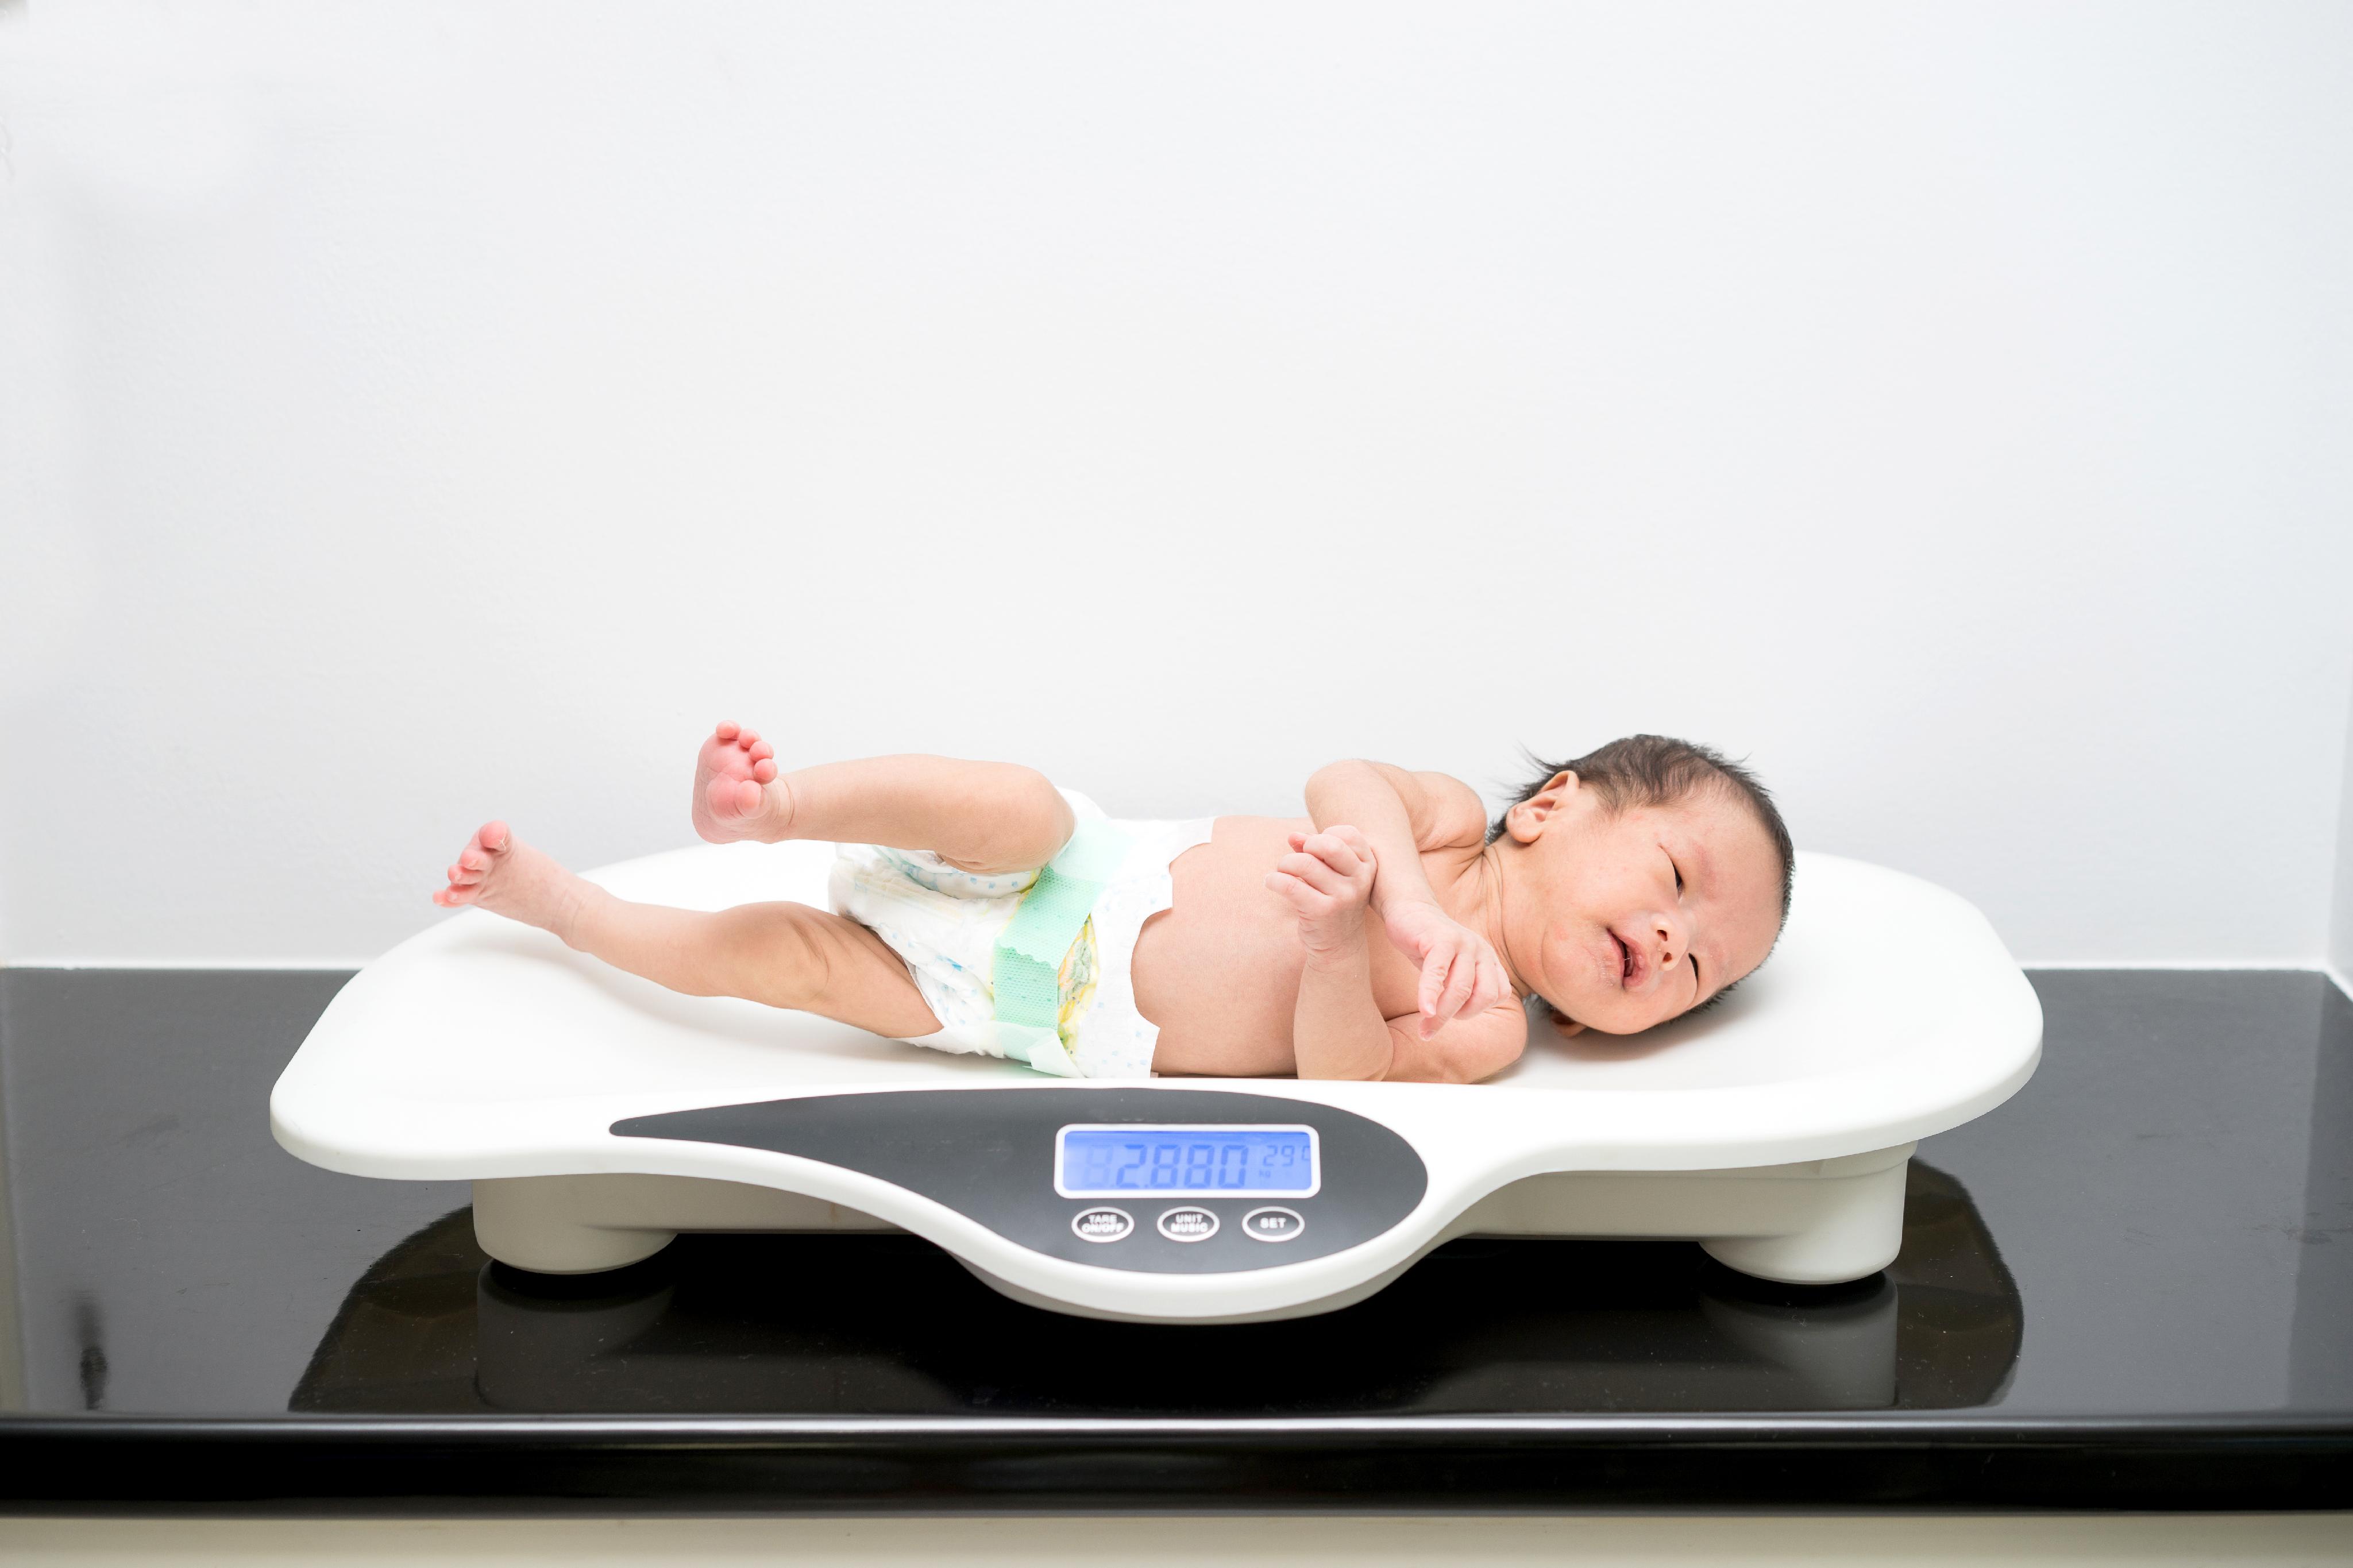 All you need to know about your newborn's birth weight